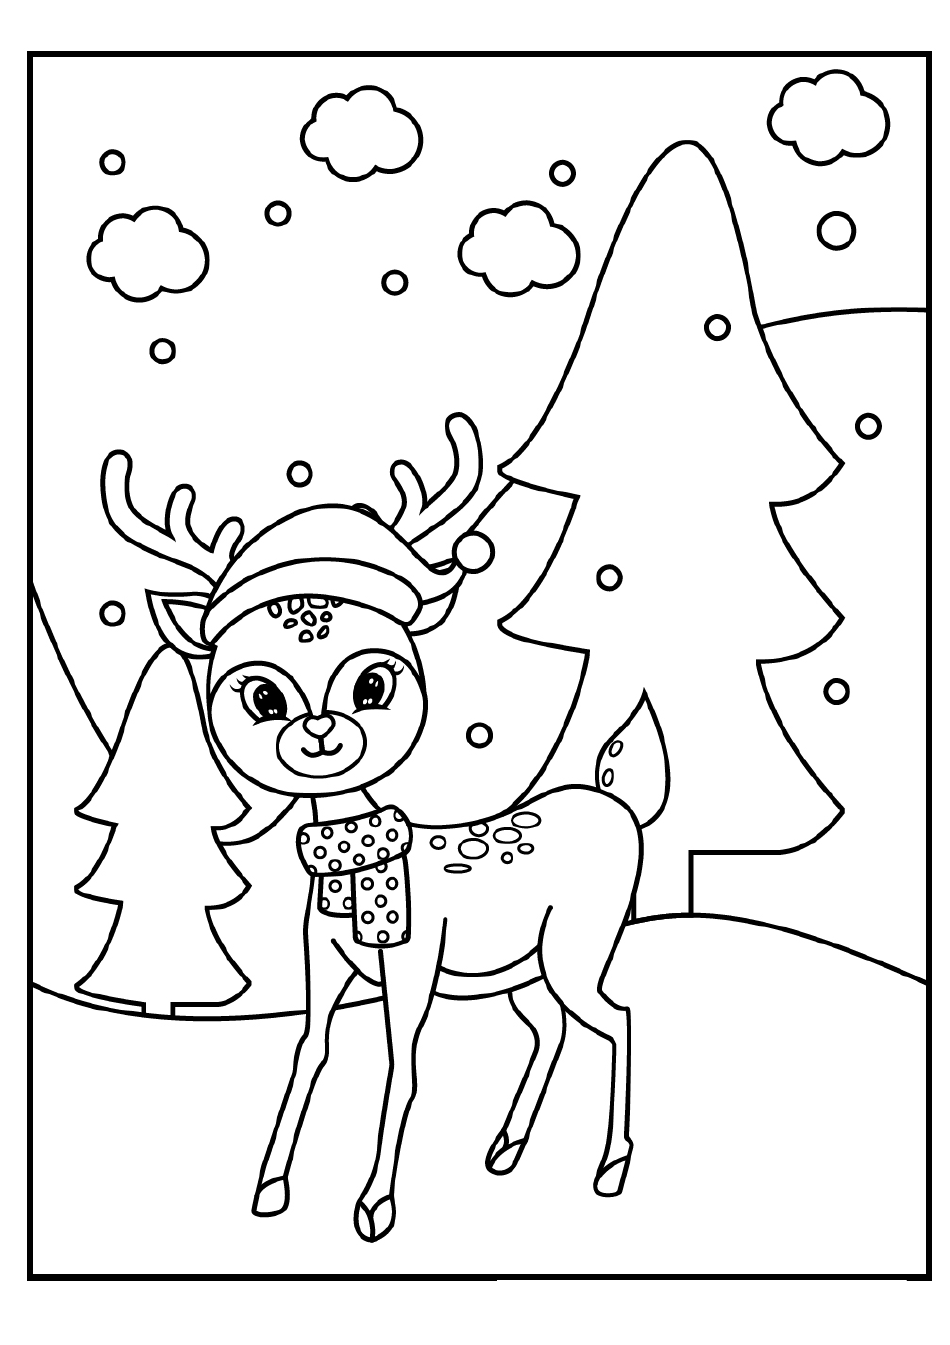 Reindeer and Christmas tree coloring page